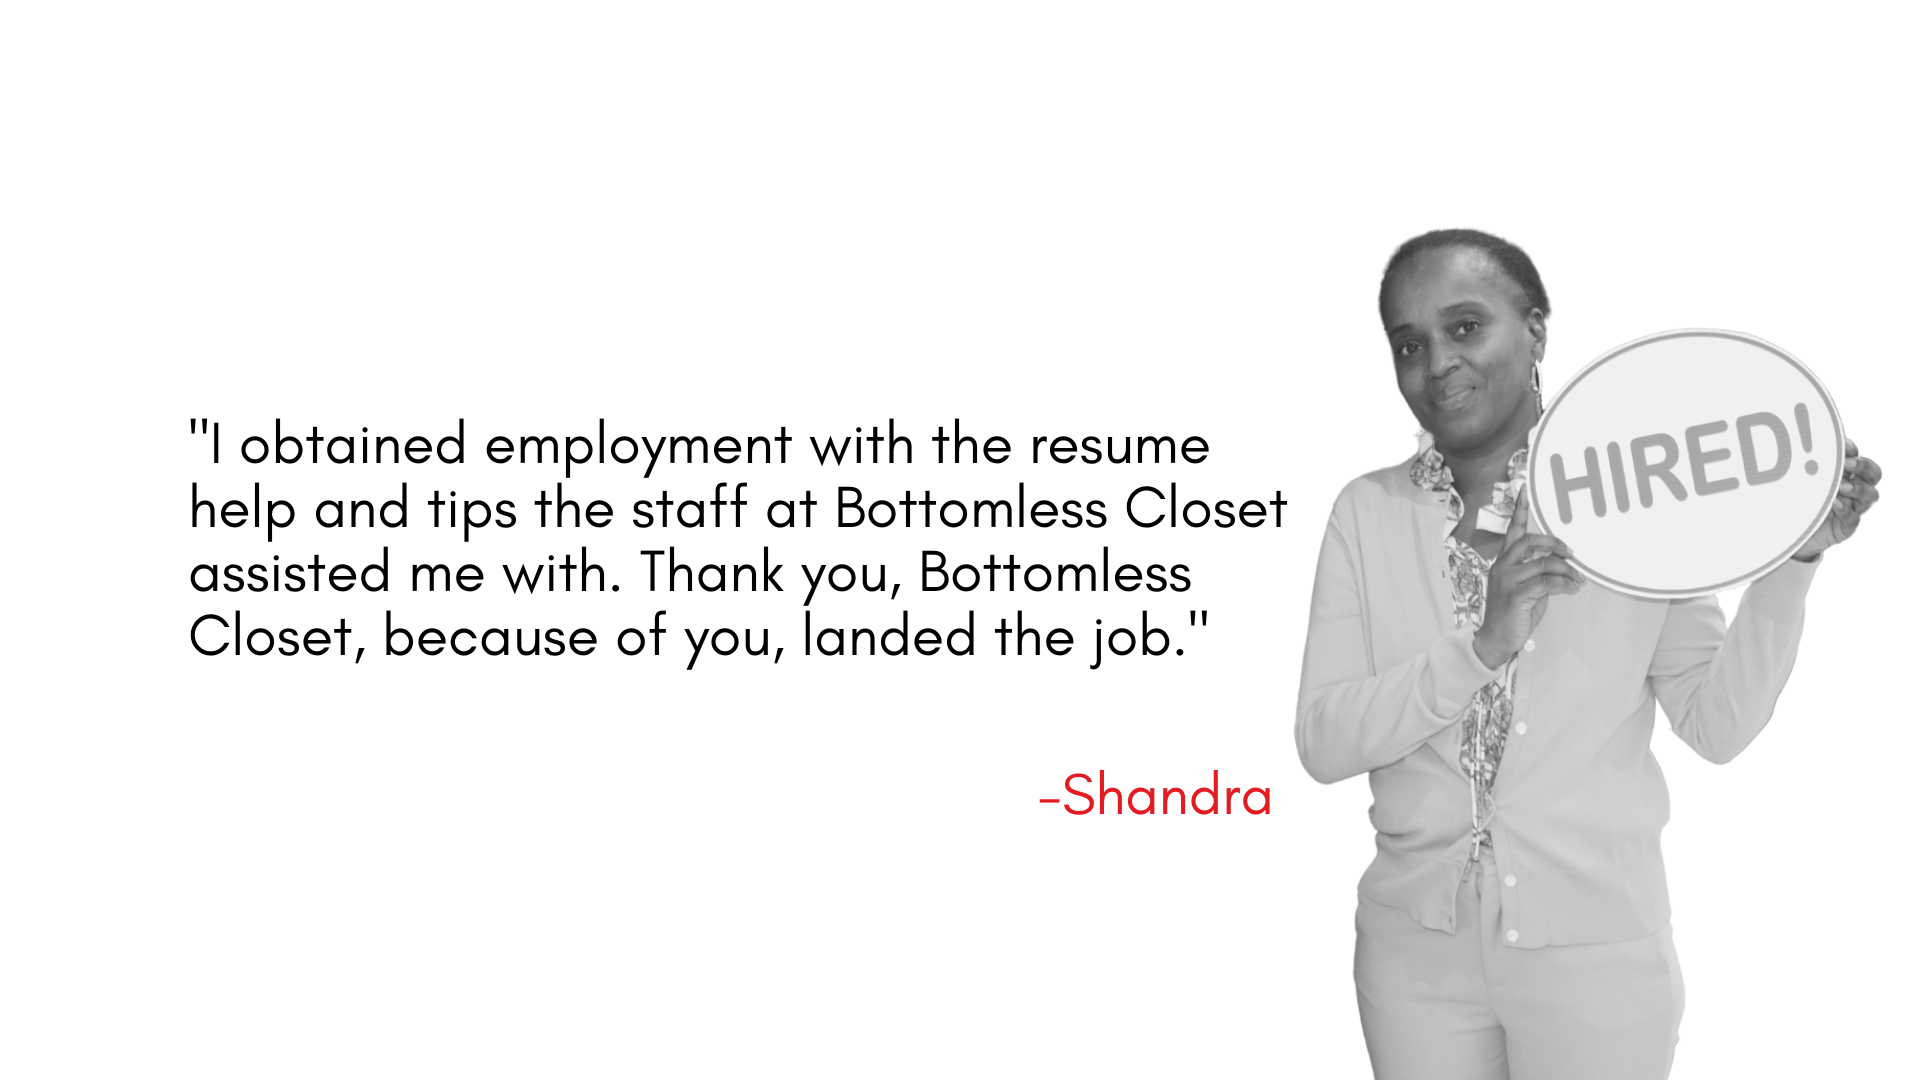 "I obtained employment with the resume help and tips the staff at Bottomless Closet assisted me with. Thank you, Bottomless Closet, because of you, landed the job."